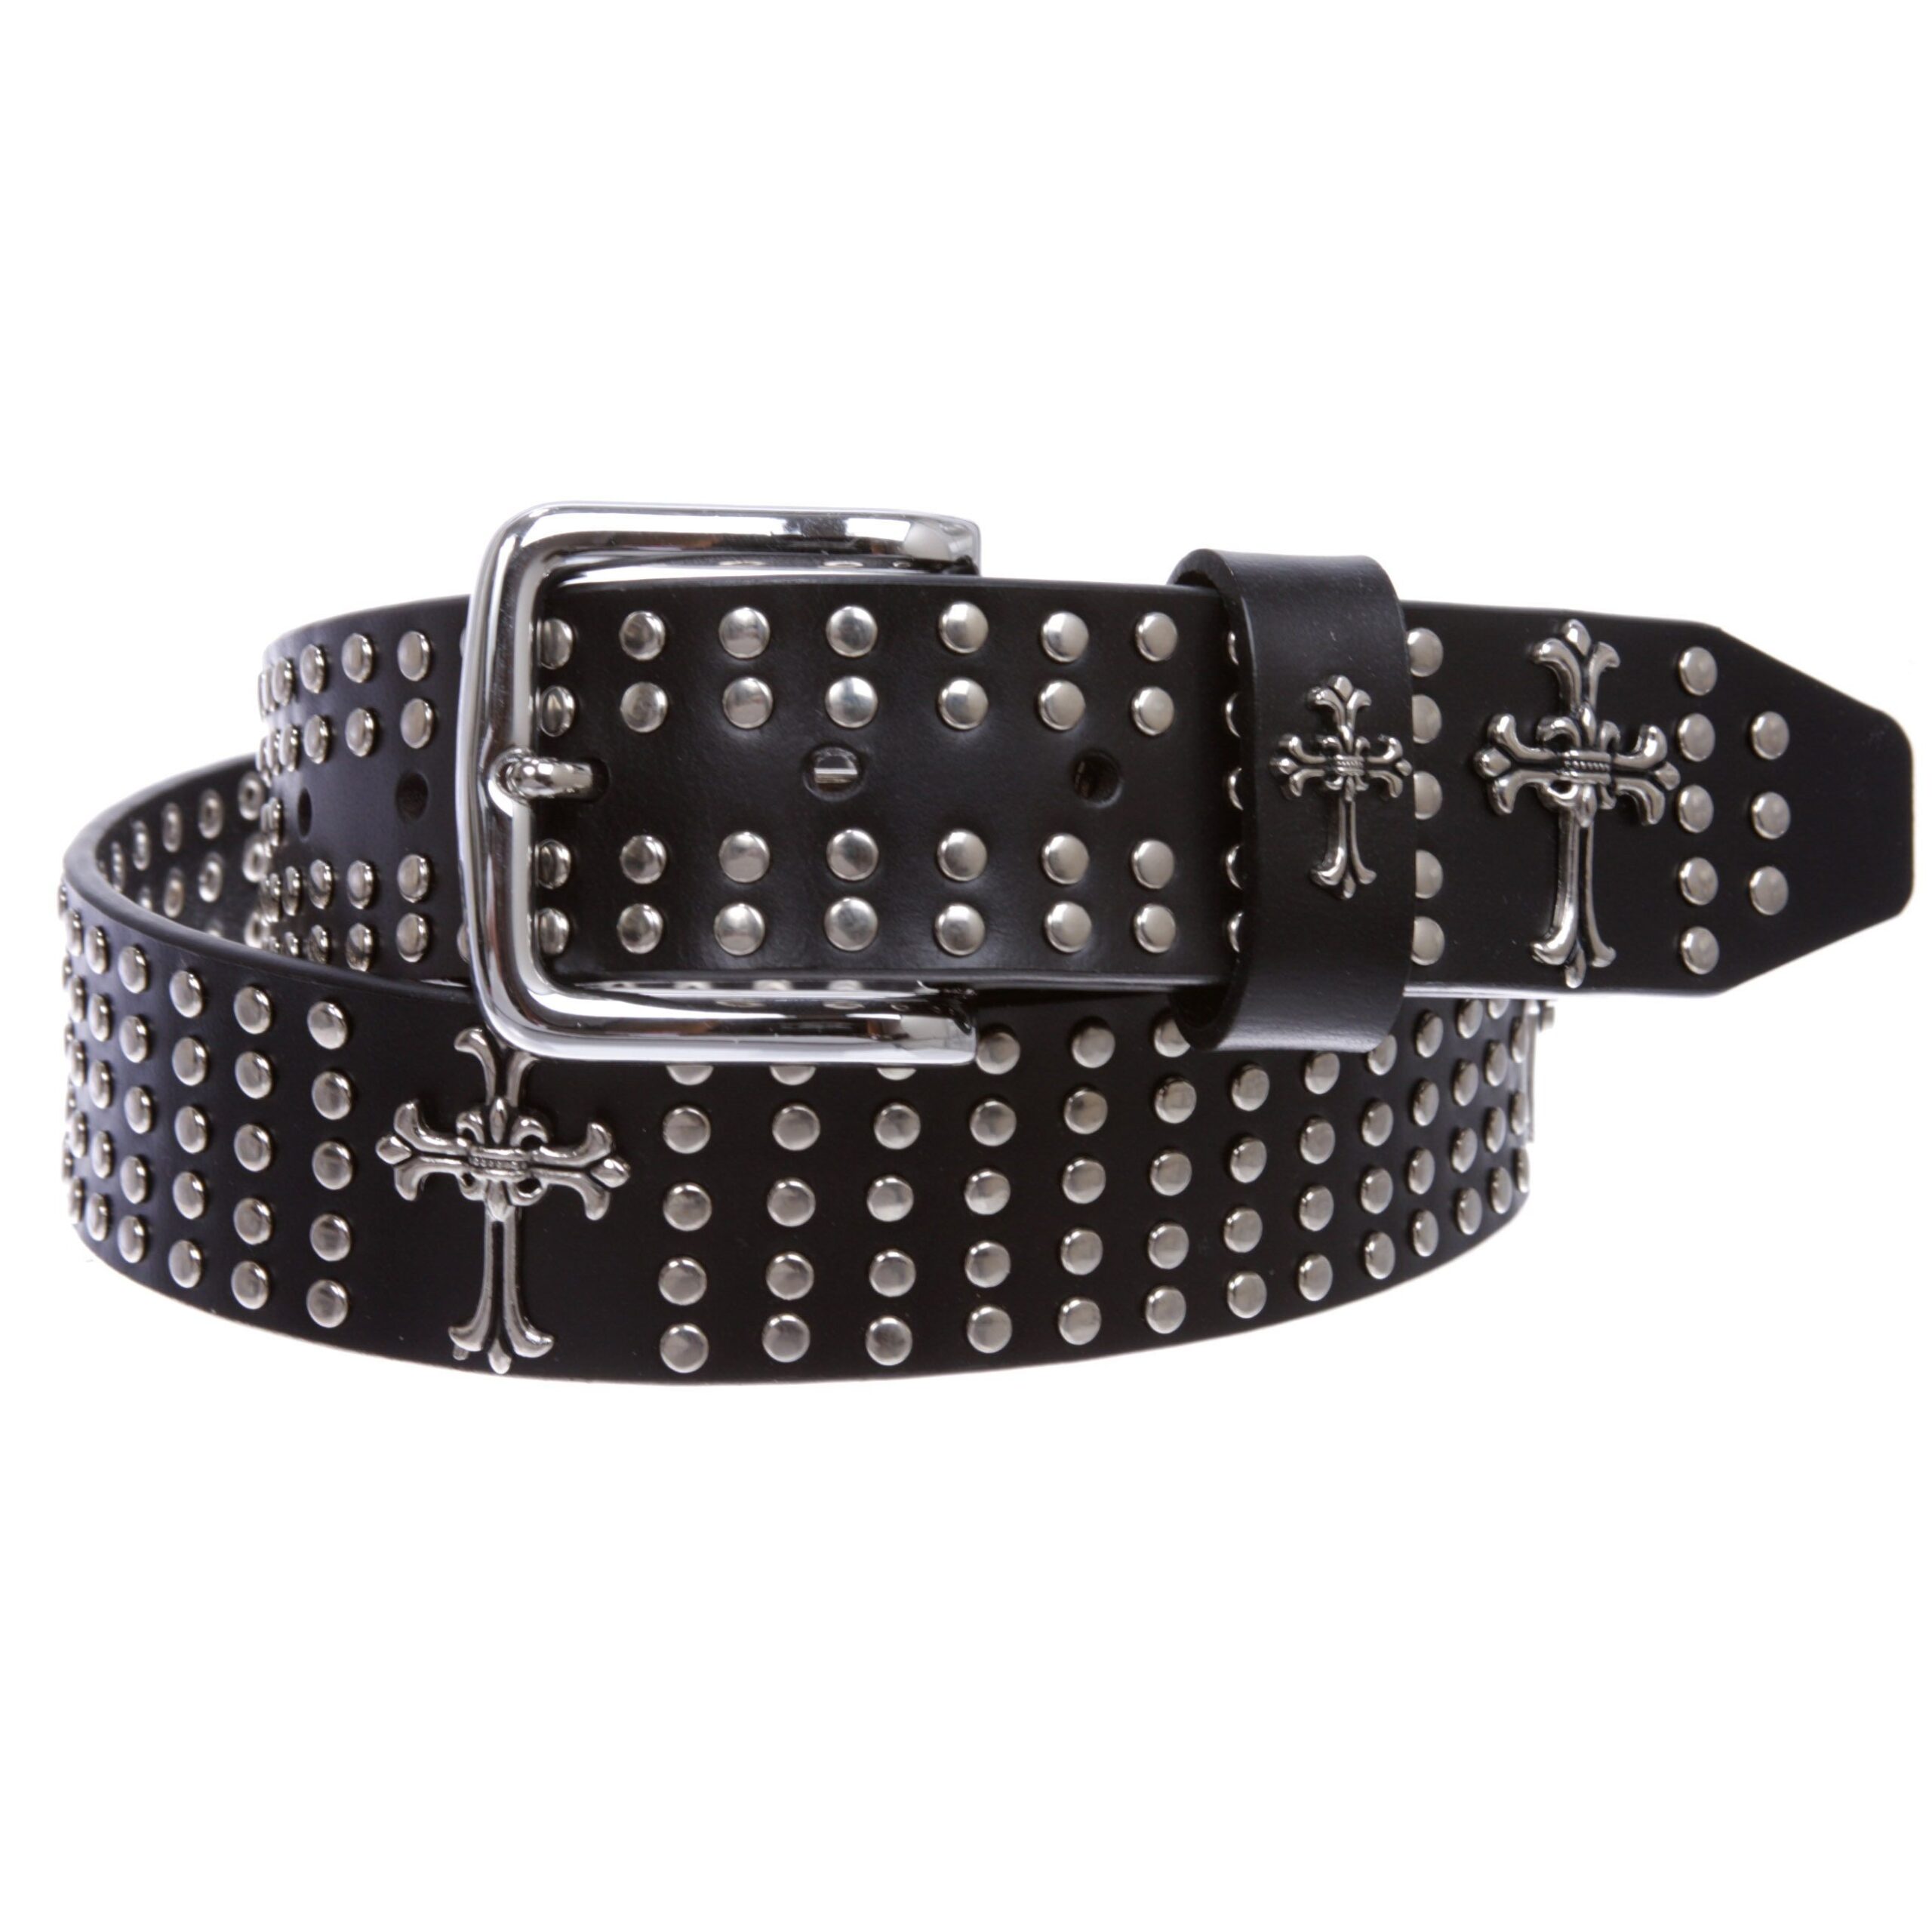 Accessorize in Style: Exploring Studded Belts